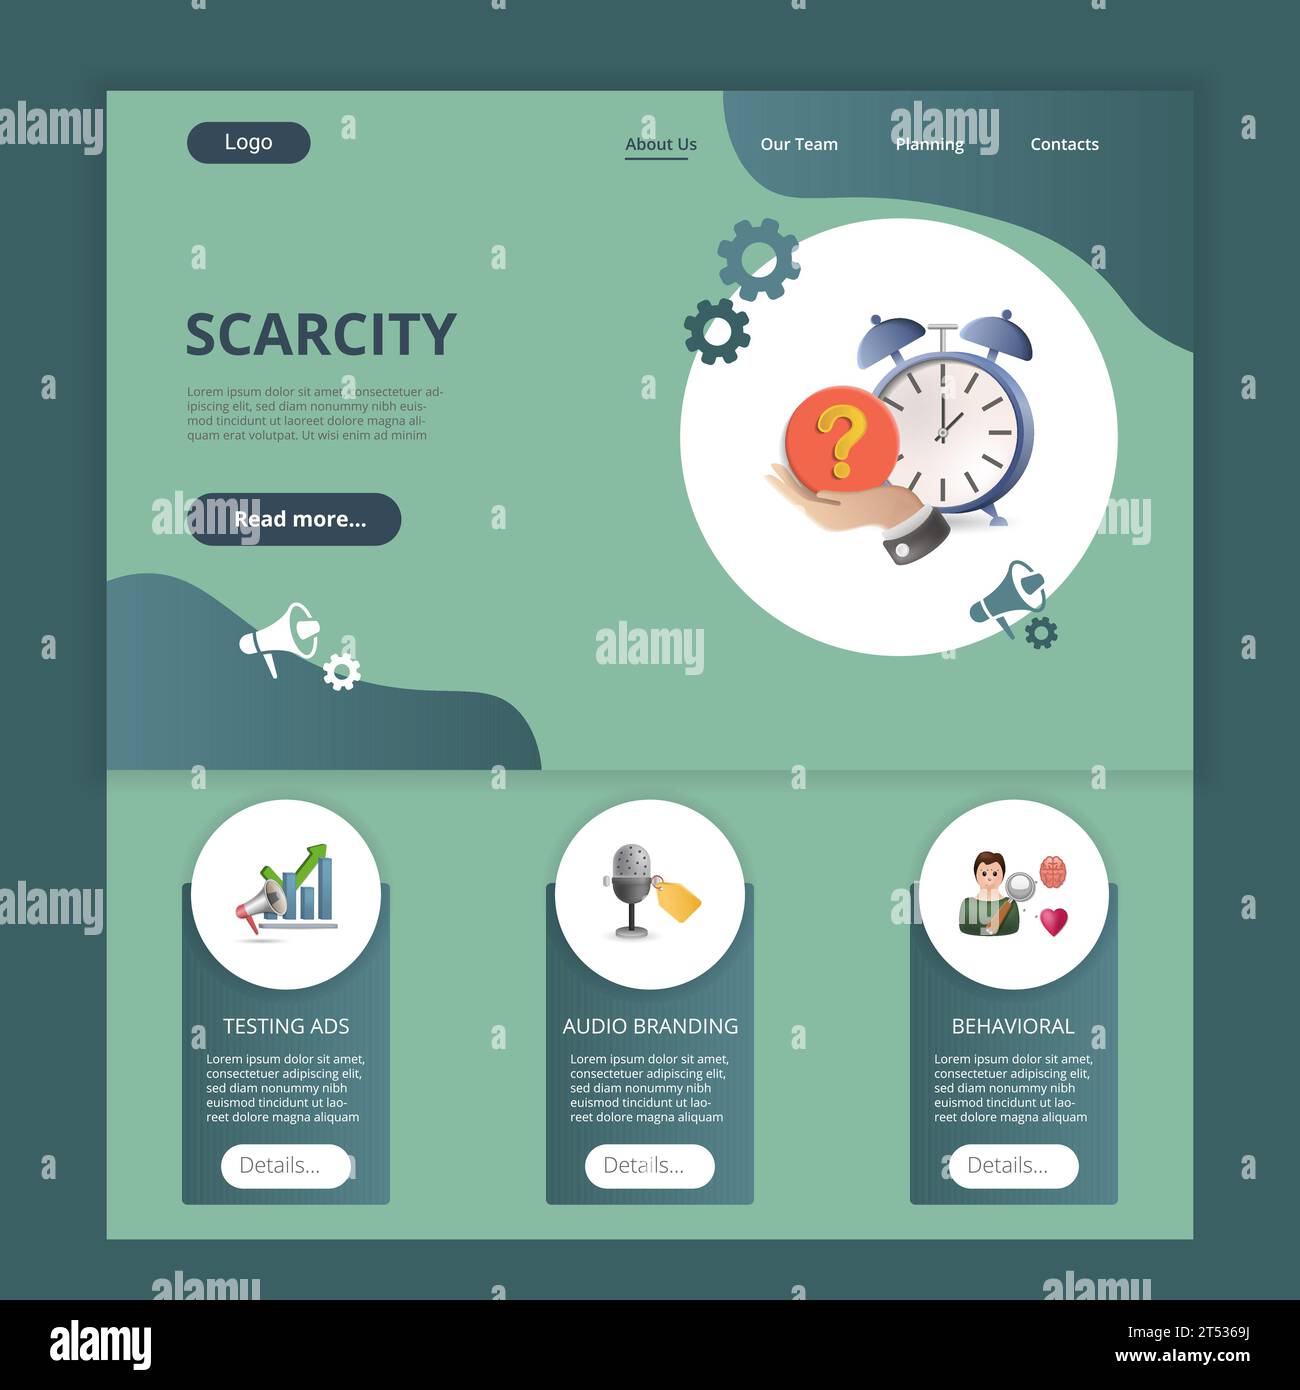 Scarcity flat landing page website template. Testing ads, audio branding, behavioral. Web banner with header, content and footer. Vector illustration. Stock Vector